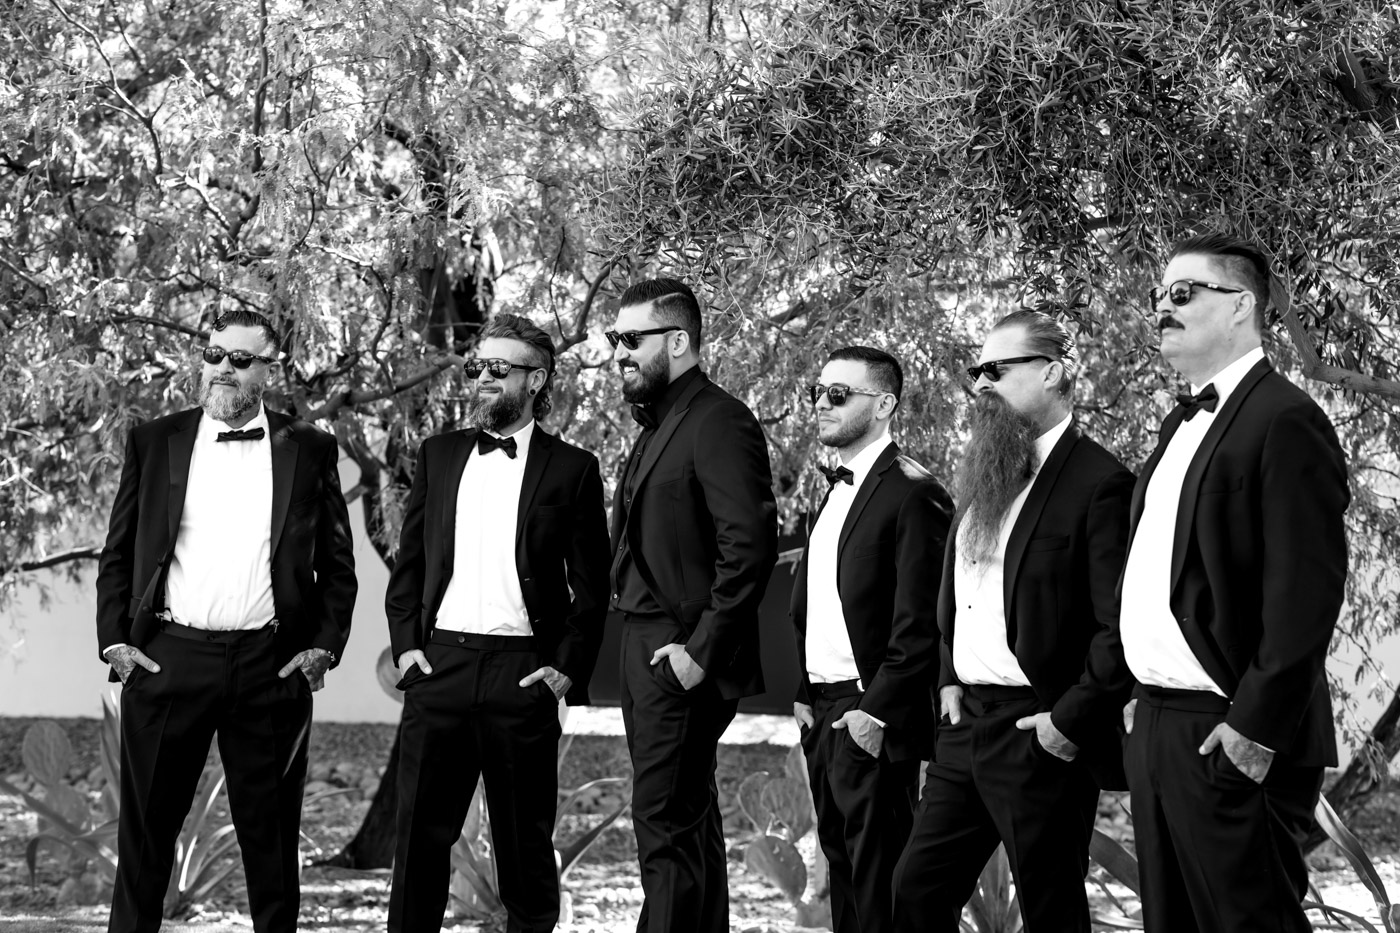 Groom and groomsmen with sunglasses black and white